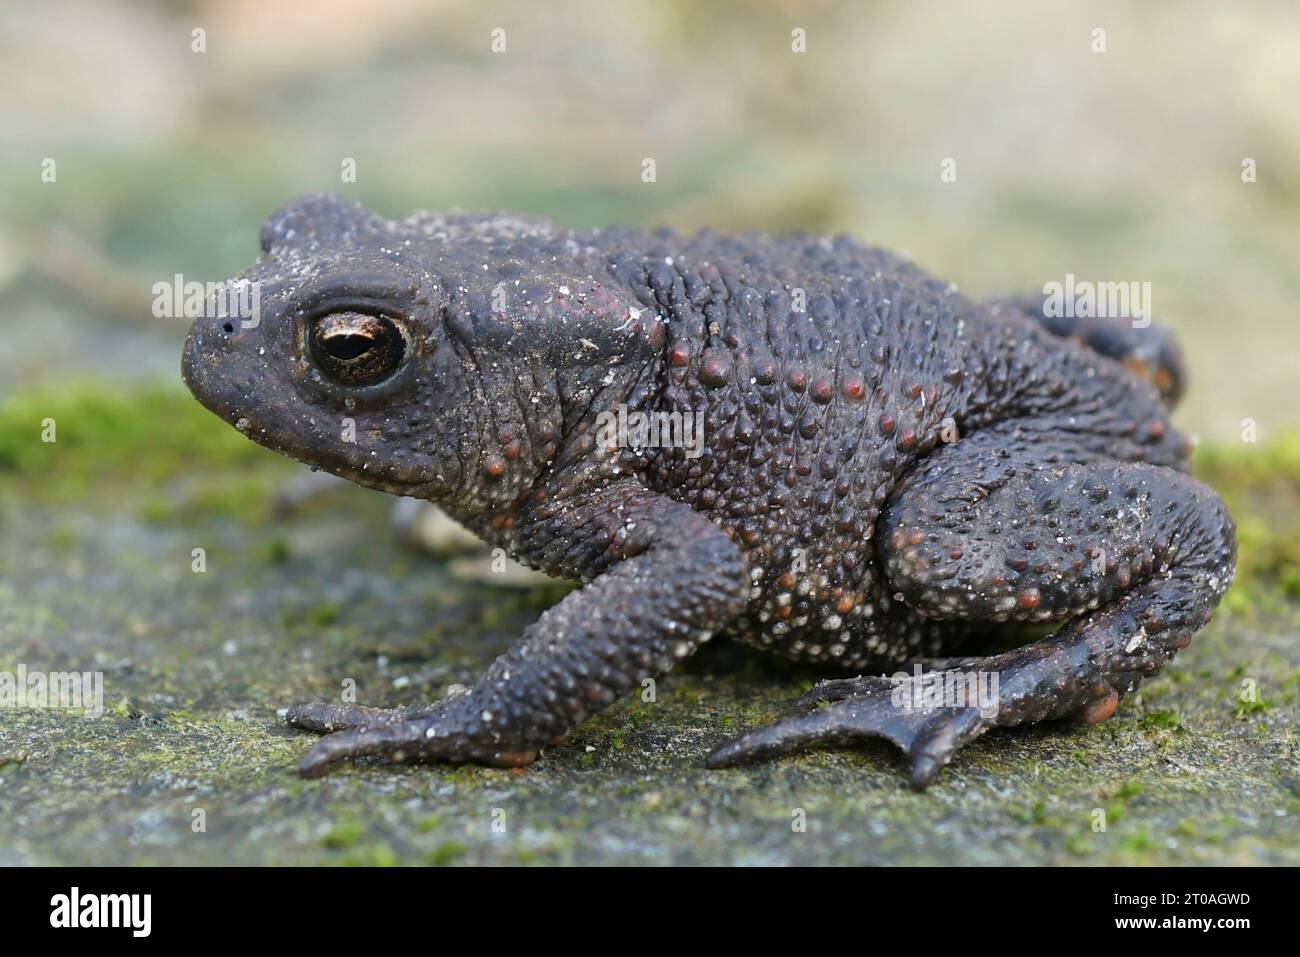 Natural closeup on a Common Europea toad, Bufo bufo sitting in the garden Stock Photo